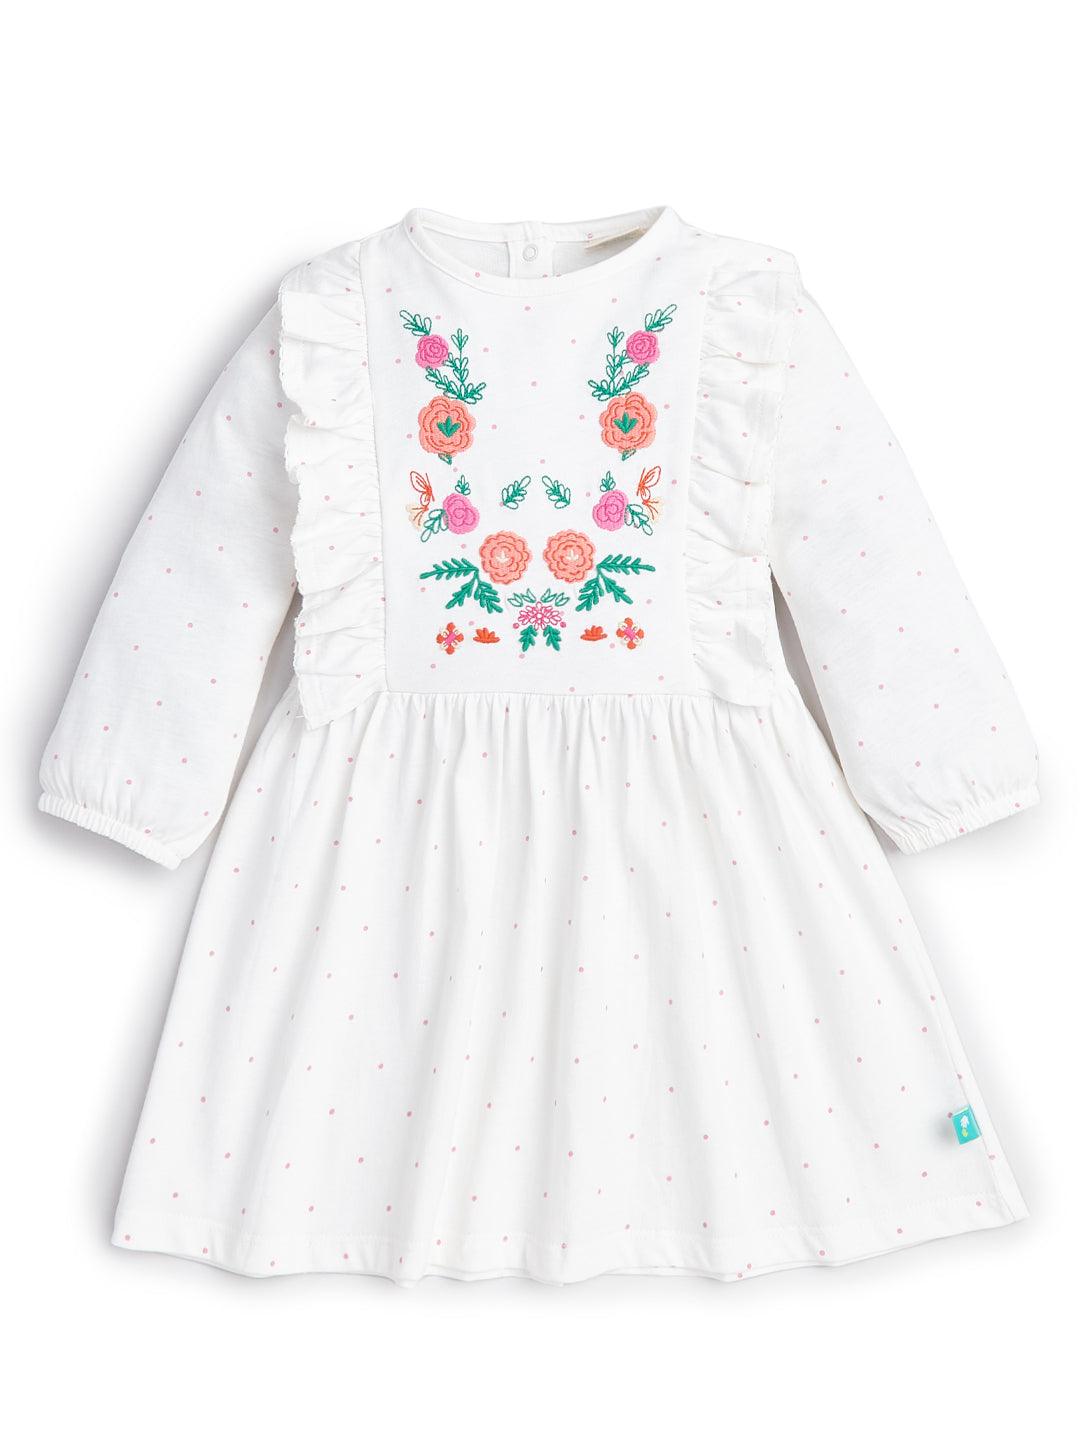 Baby Girls Graphic Printed Fit & Flare Dress - Juscubs